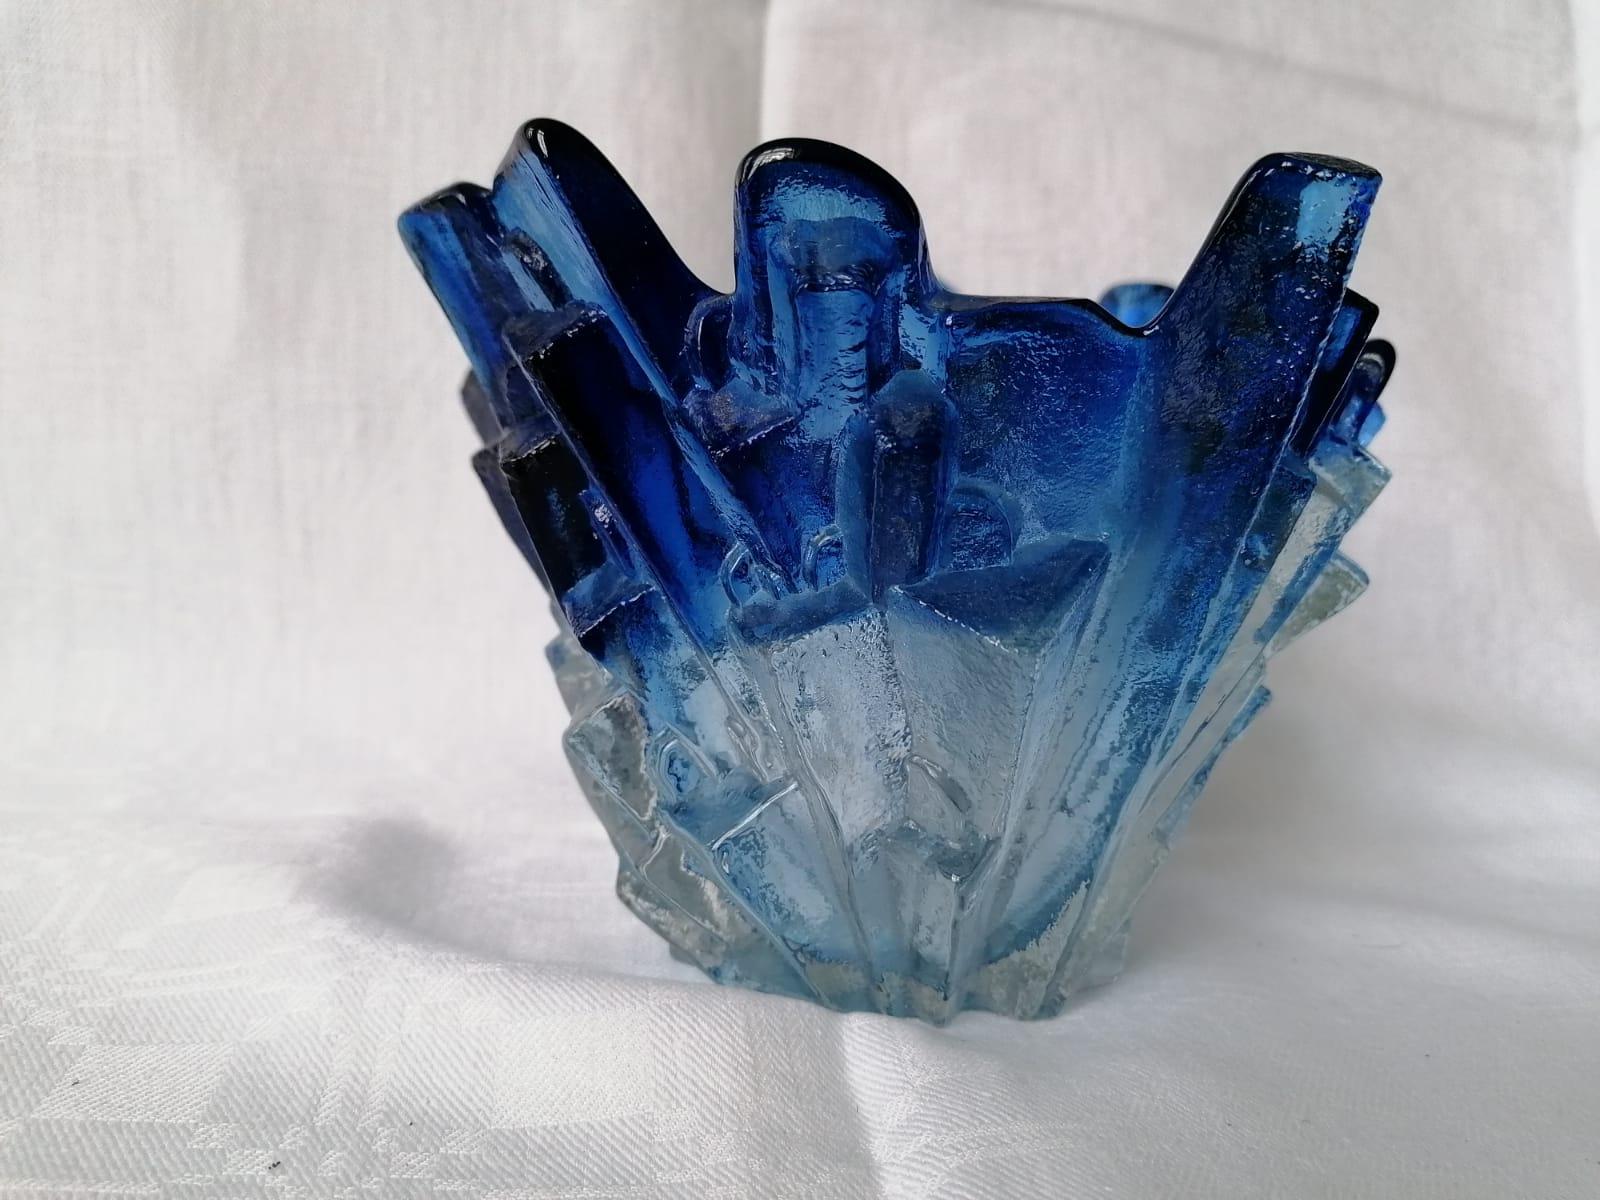 Handblown midcentury blue/clear vase designed by Tapio Wirkkala in the 1960s for Humppila.